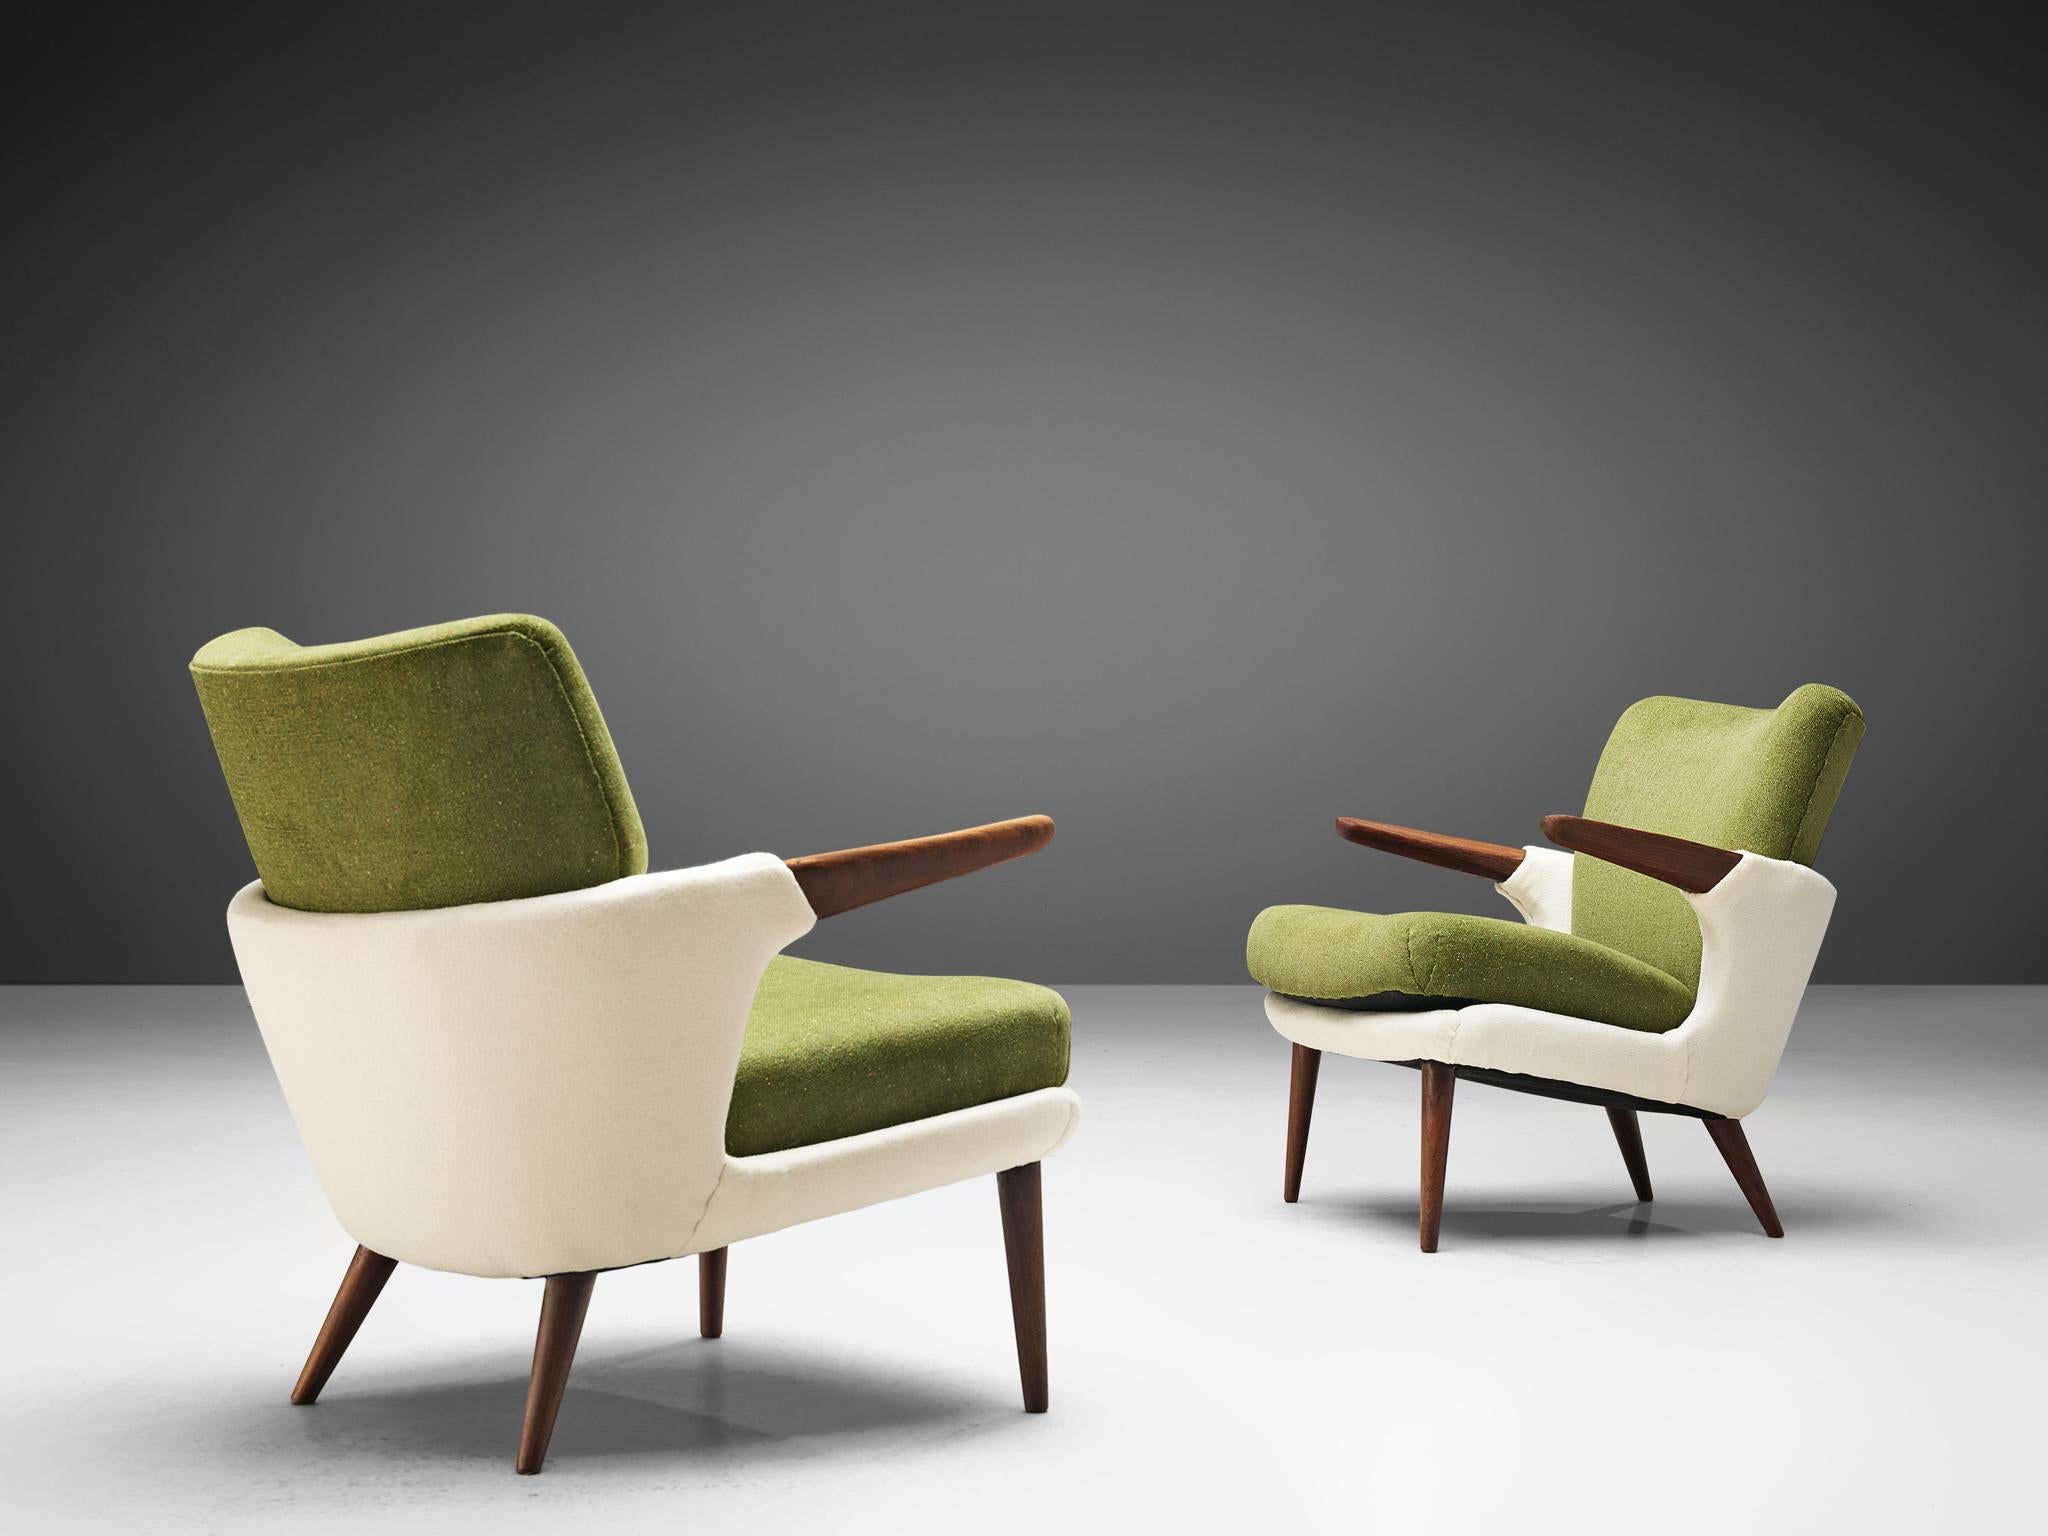 Ib Kofod-Larsen for Christensen and Larsen, pair of easy chairs, model 423, teak and woolen upholstery, Denmark, 1954

Pair of rare model 423 armchairs, designed by Ib Kofod-Larsen for Christensen and Larsen in 1954. The comfortable set is executed